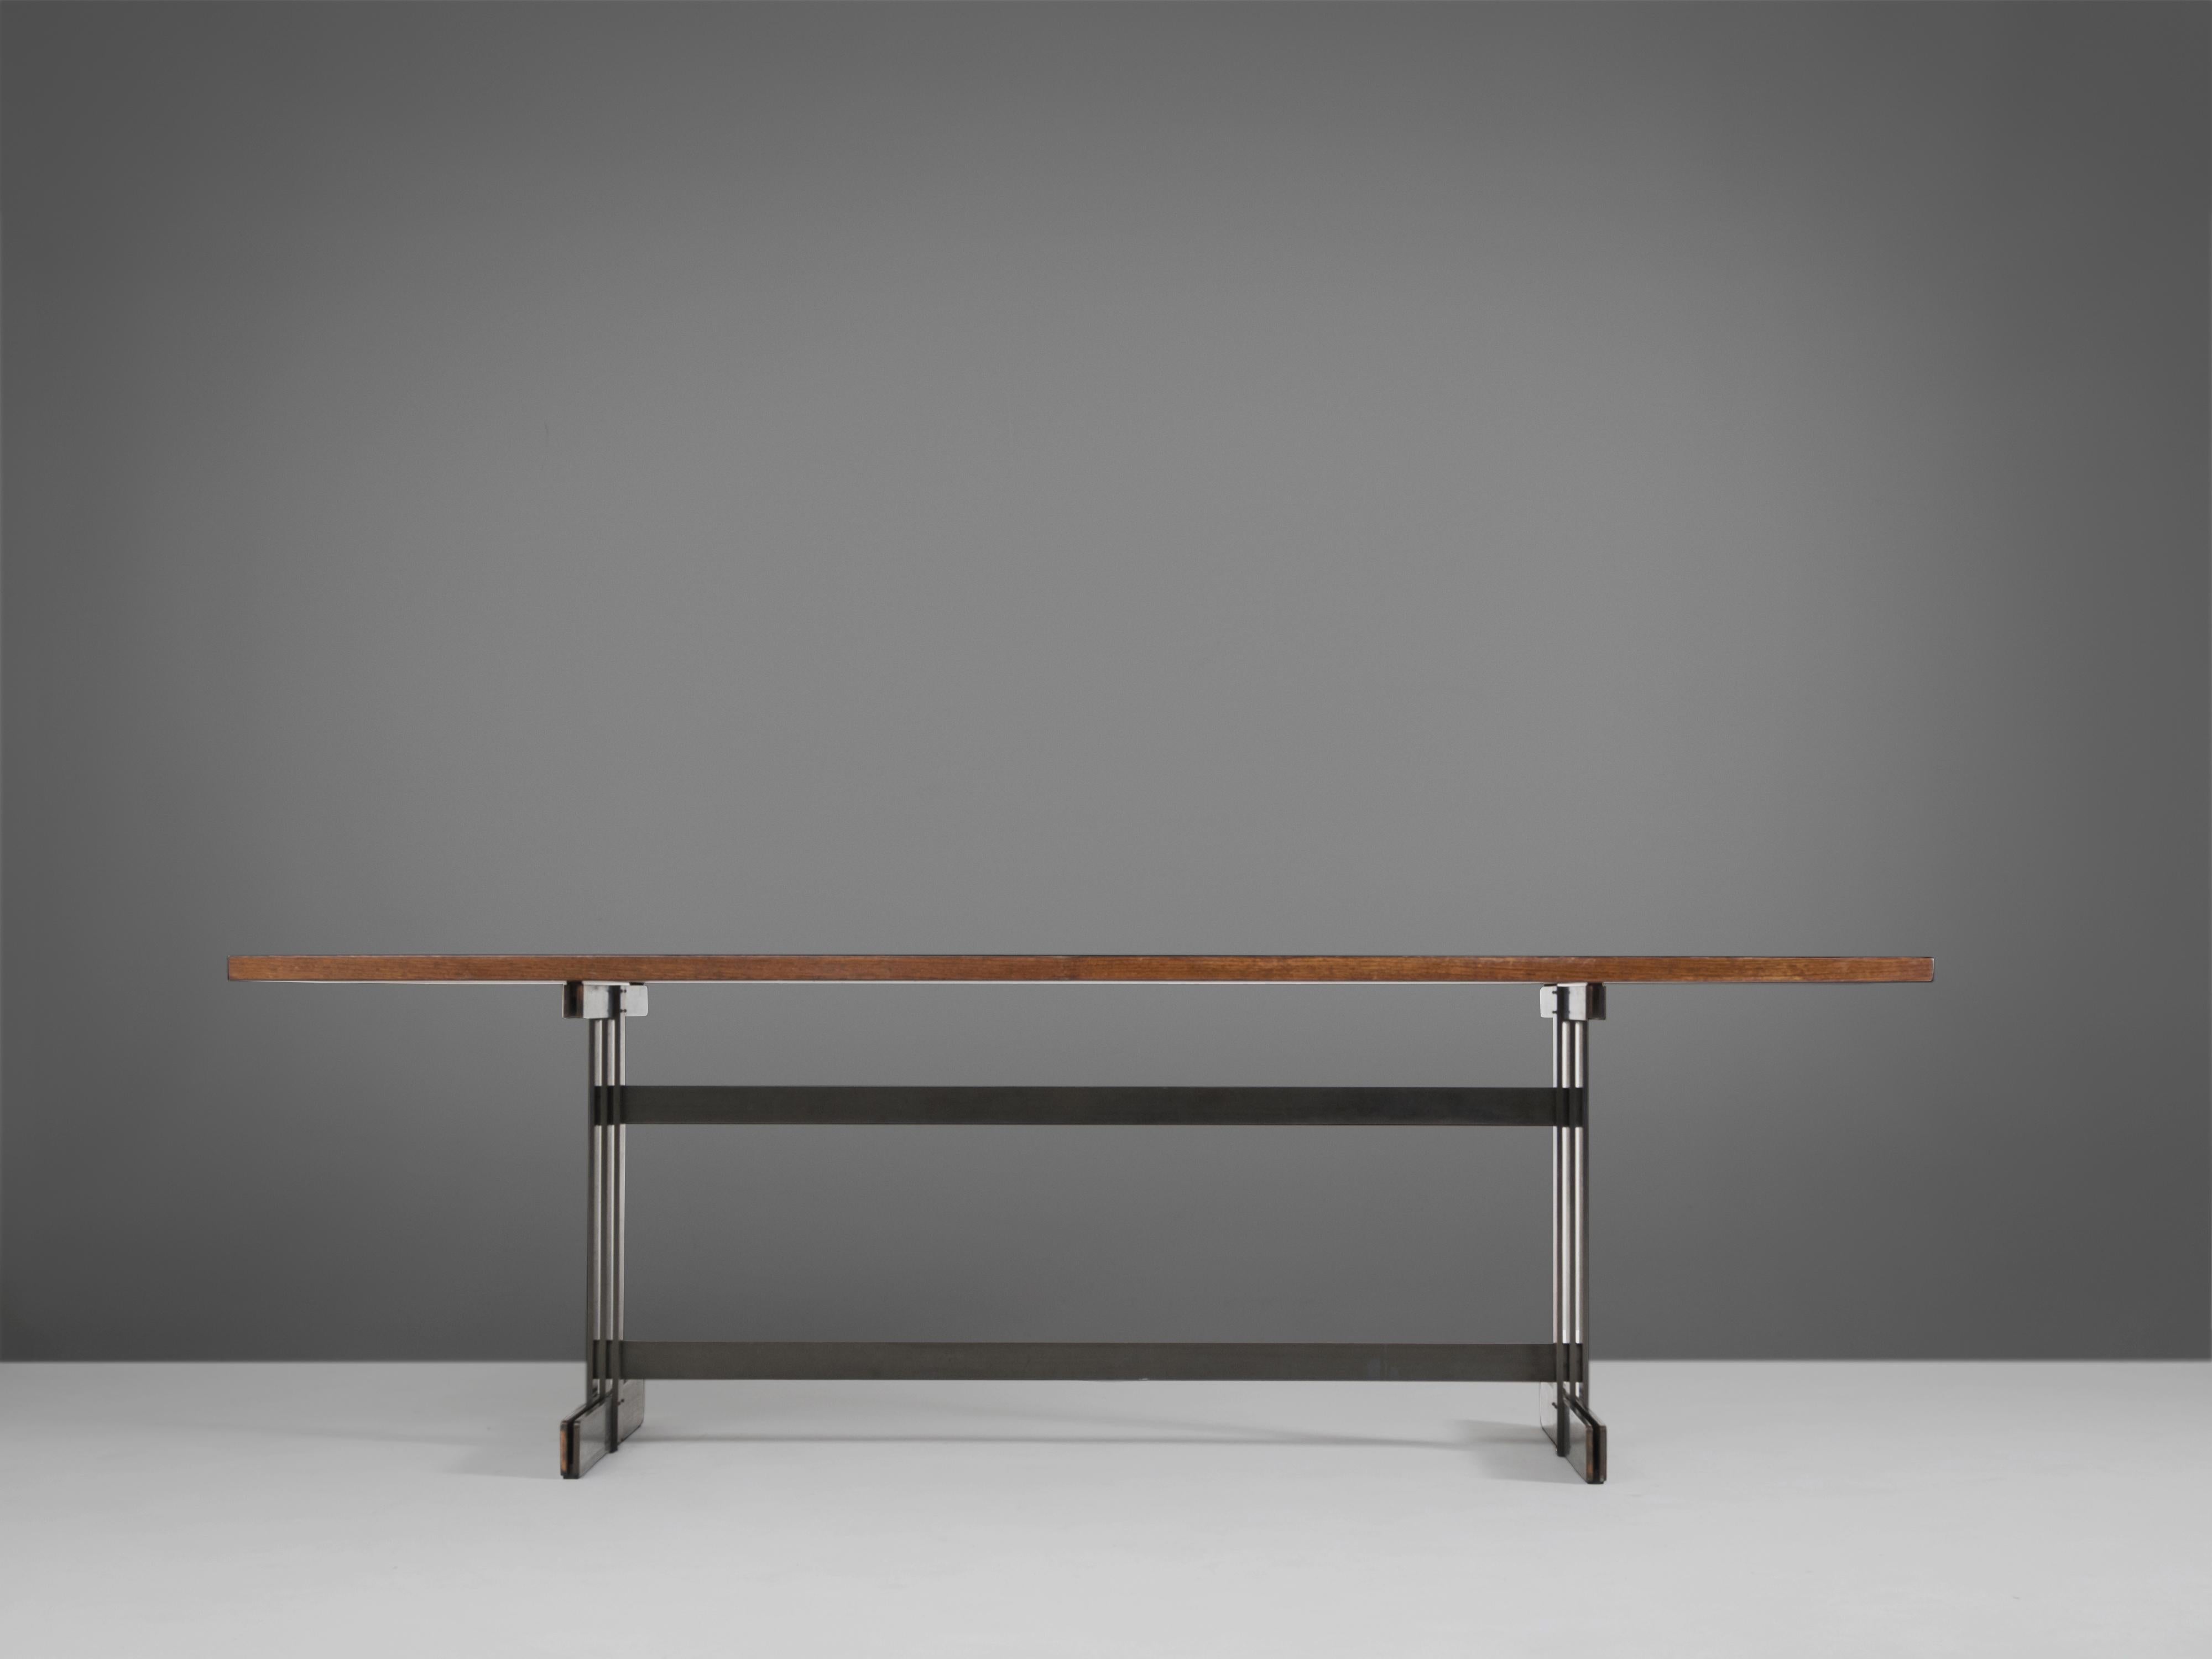 Jules Wabbes, 'tonneau' conference or dining table, wengé, metal, Belgium, 1960s

The model 'Tonneau', that translates as 'barrel' features a solid wengé wooden top, made out of tangentially-sawn slats. Therefore, it features a wonderful pattern